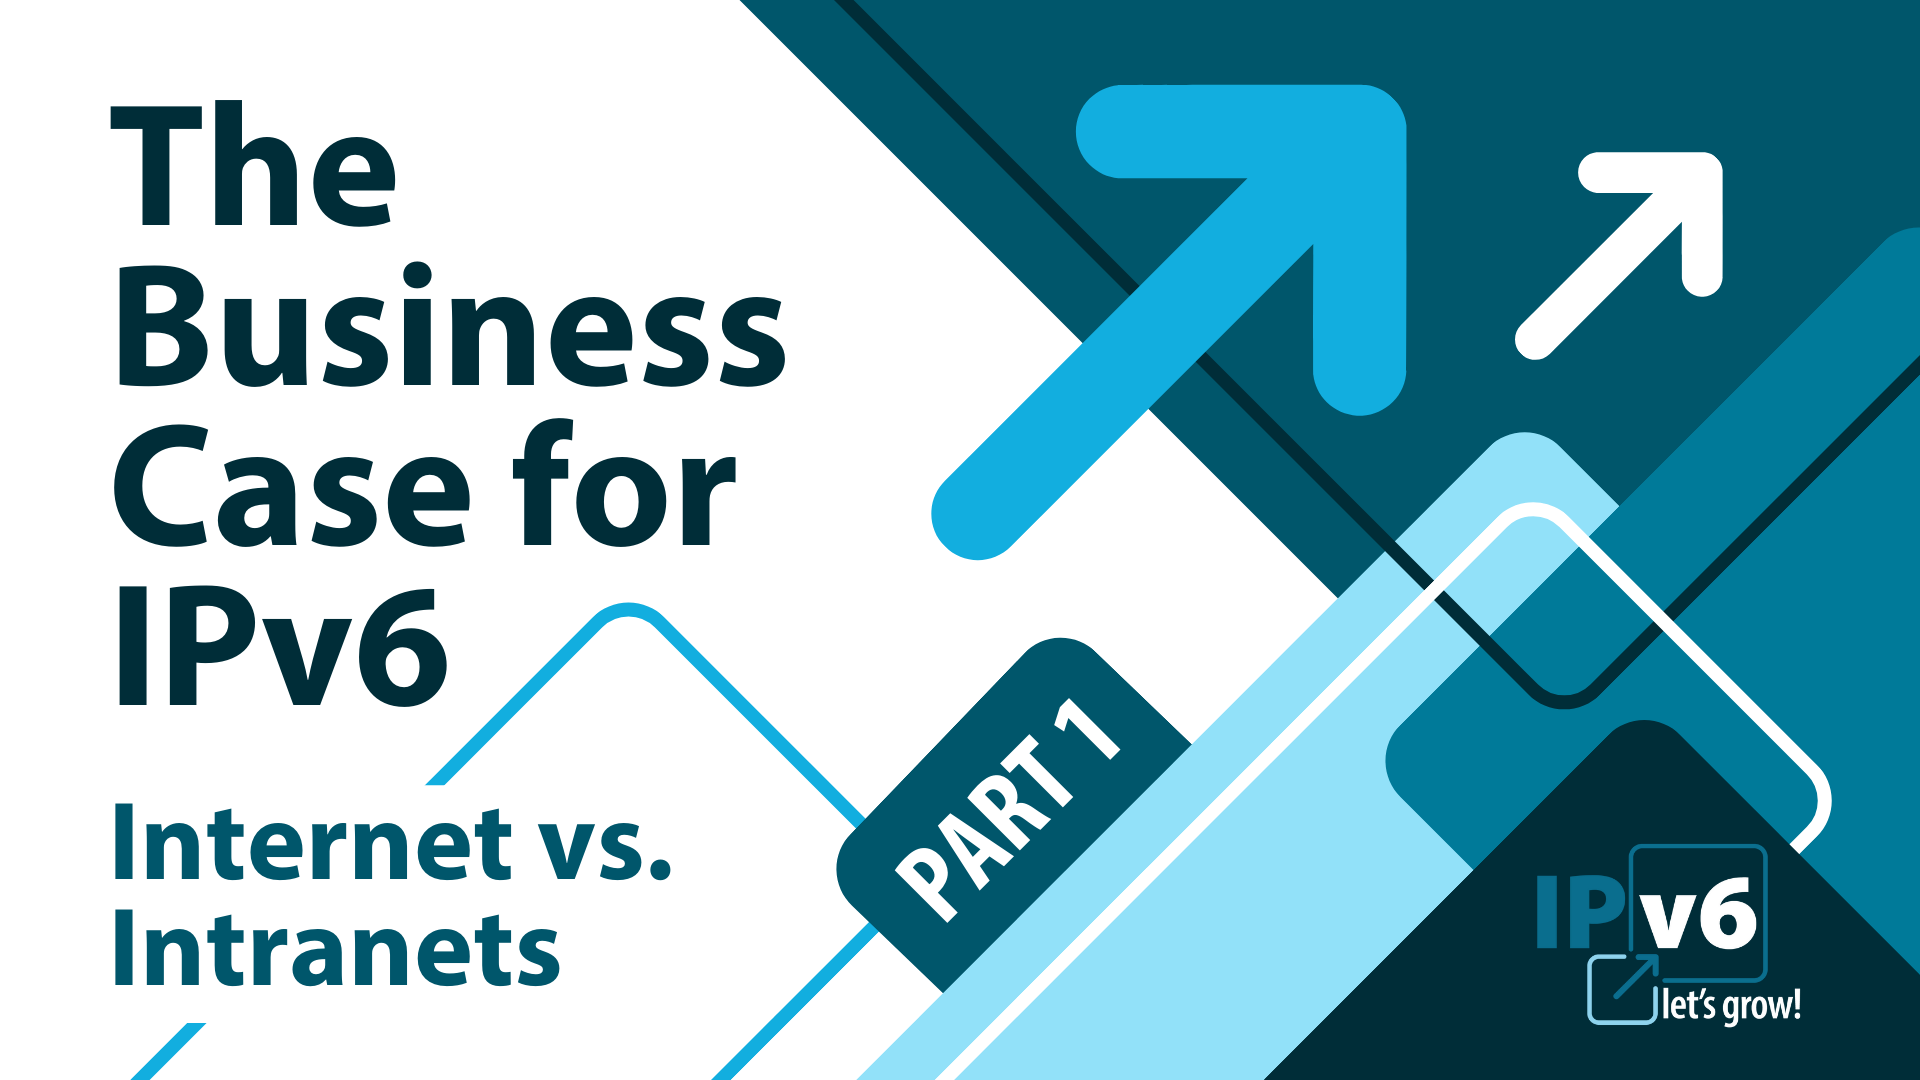 Read the blog The Business Case for IPv6: Internet vs. Intranets